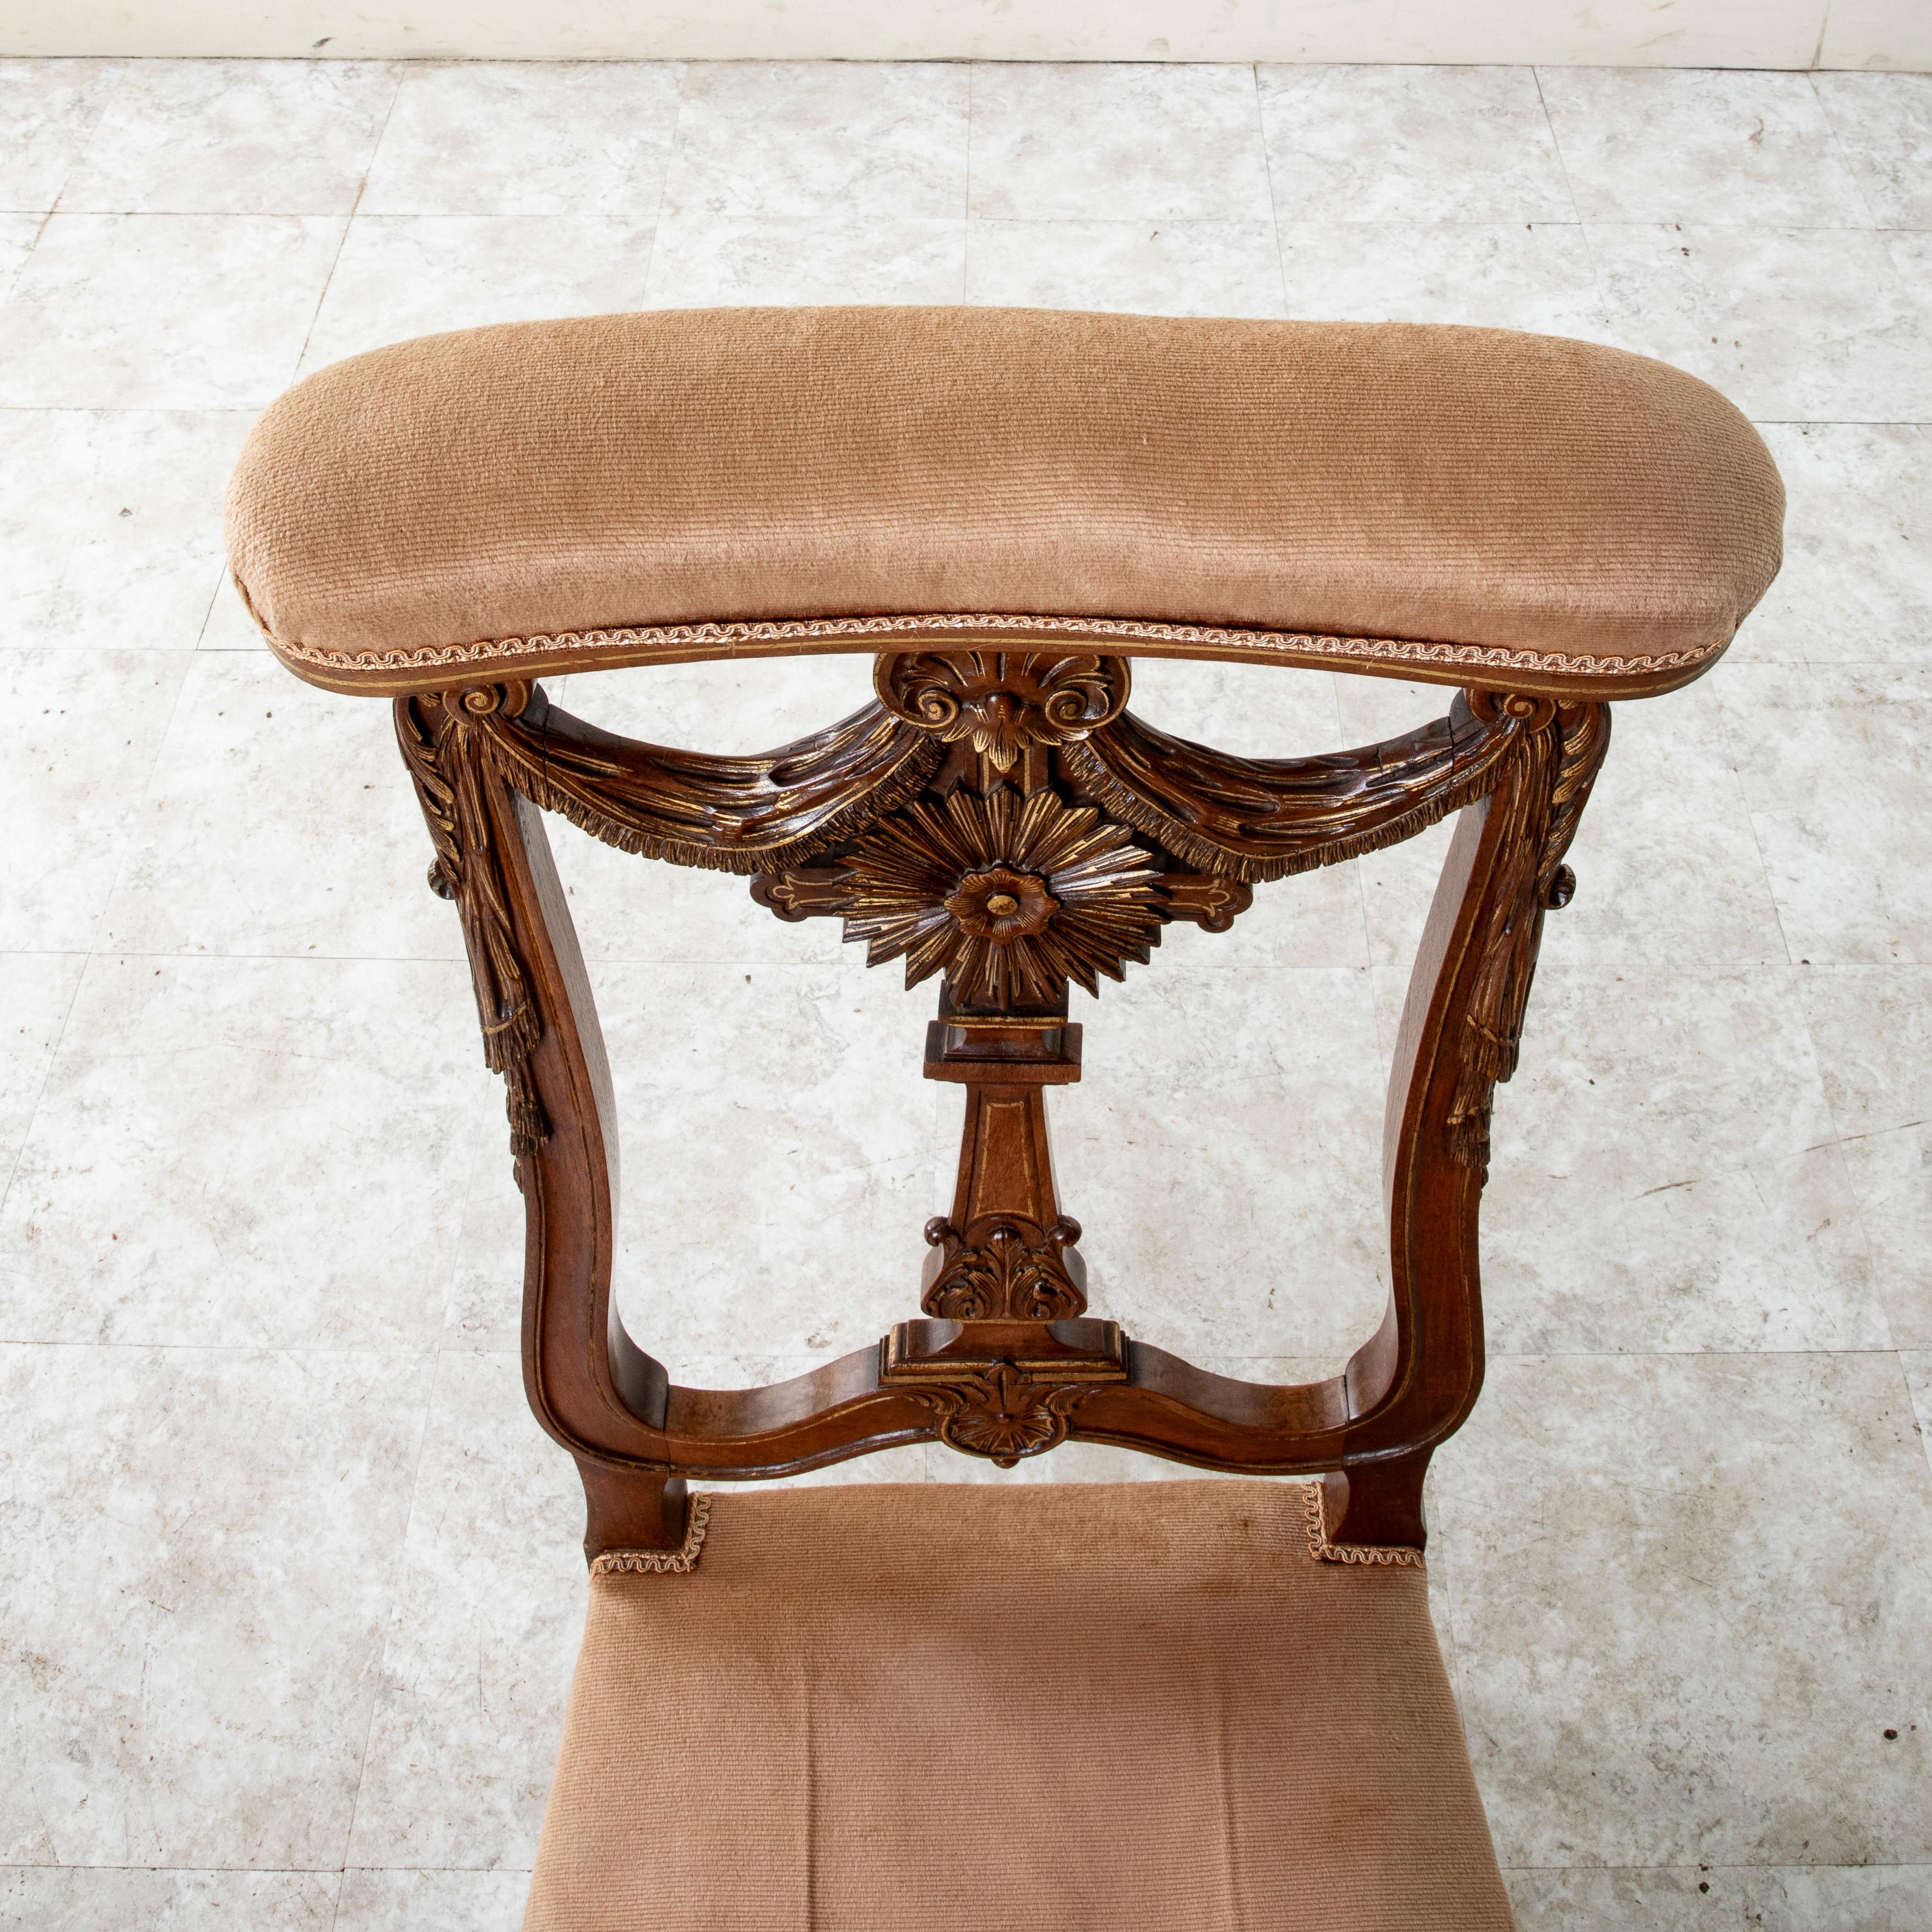 Mid-19th Century French Hand-Carved Walnut Prie Dieu or Prayer Chair For Sale 4